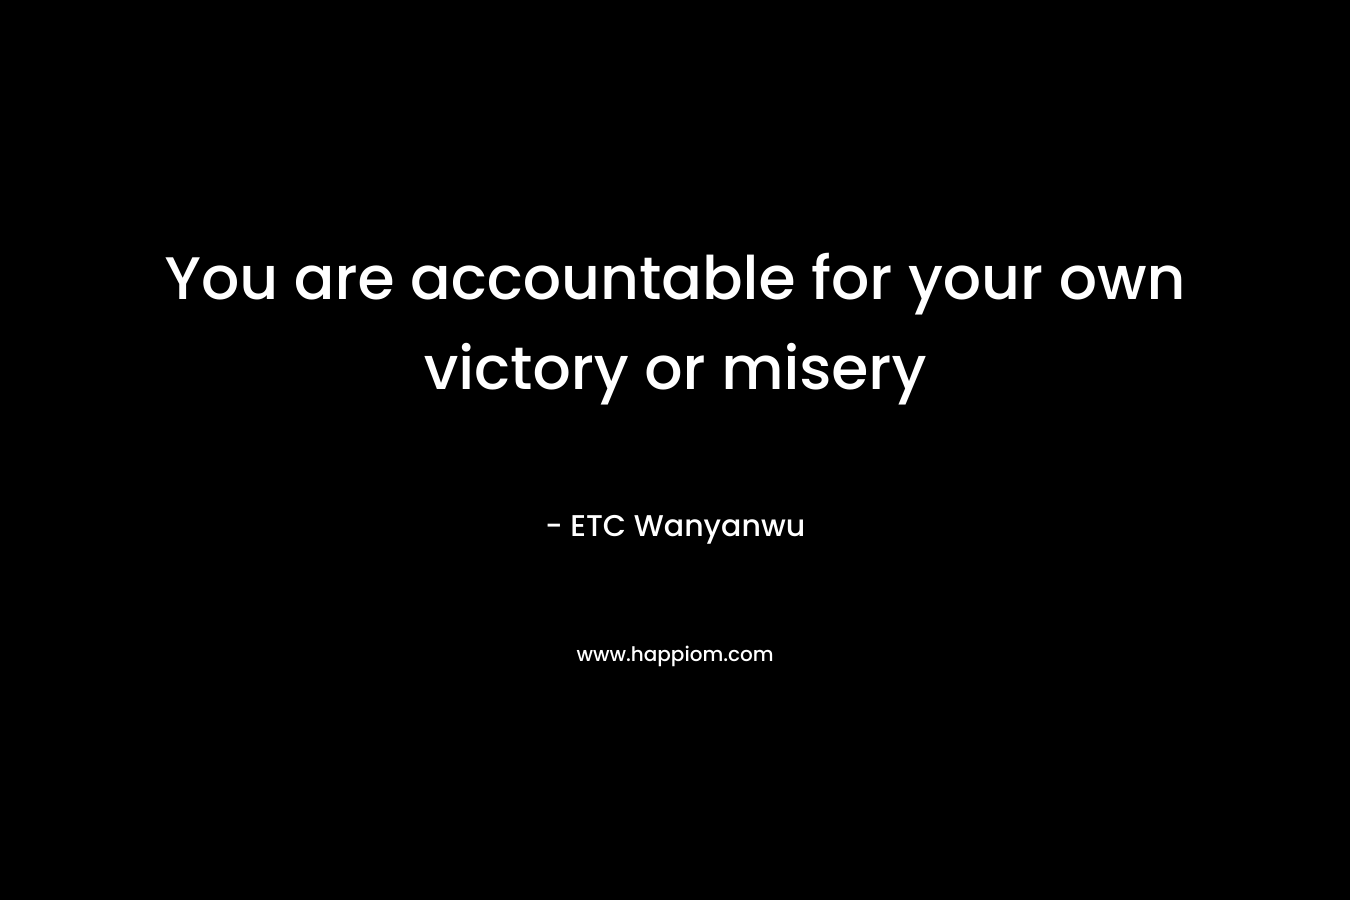 You are accountable for your own victory or misery